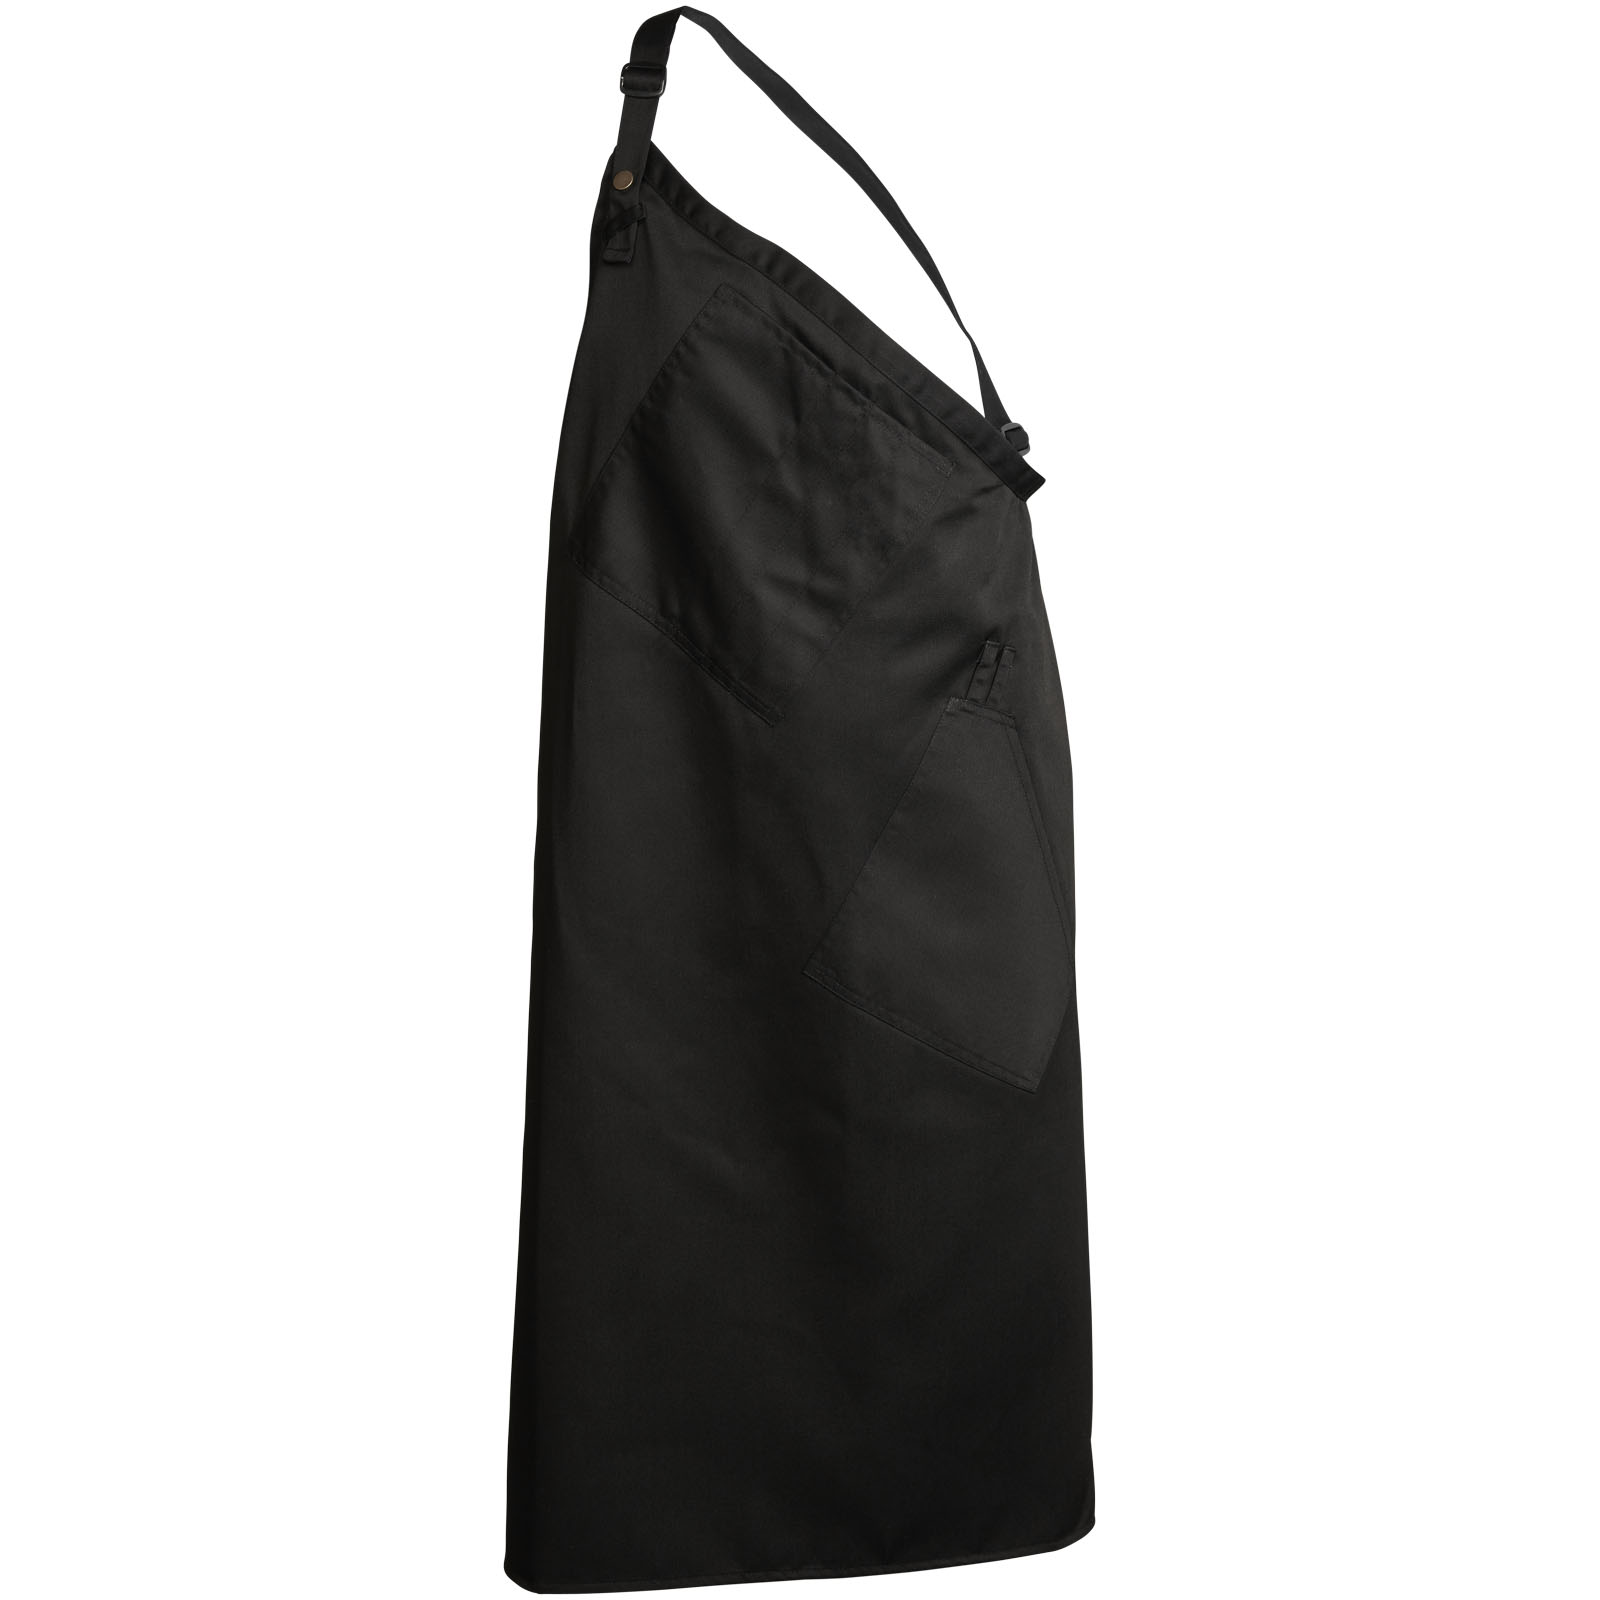 Adjustable Twill Fabric Apron - Beesby - Long Sutton